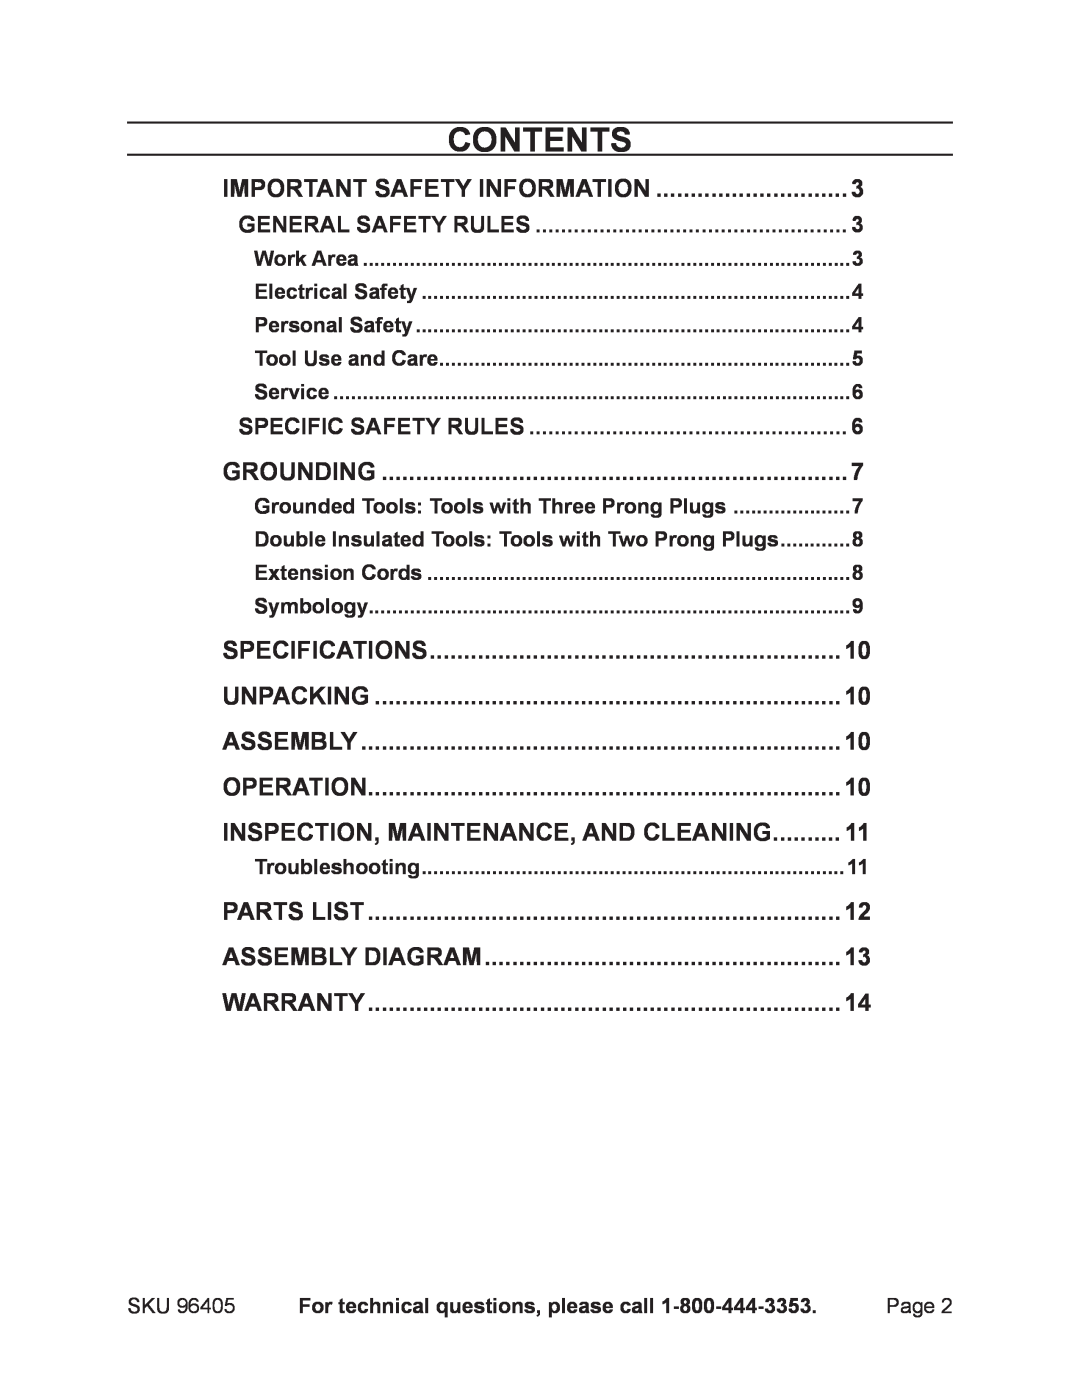 Chicago Electric 96405 manual Contents 